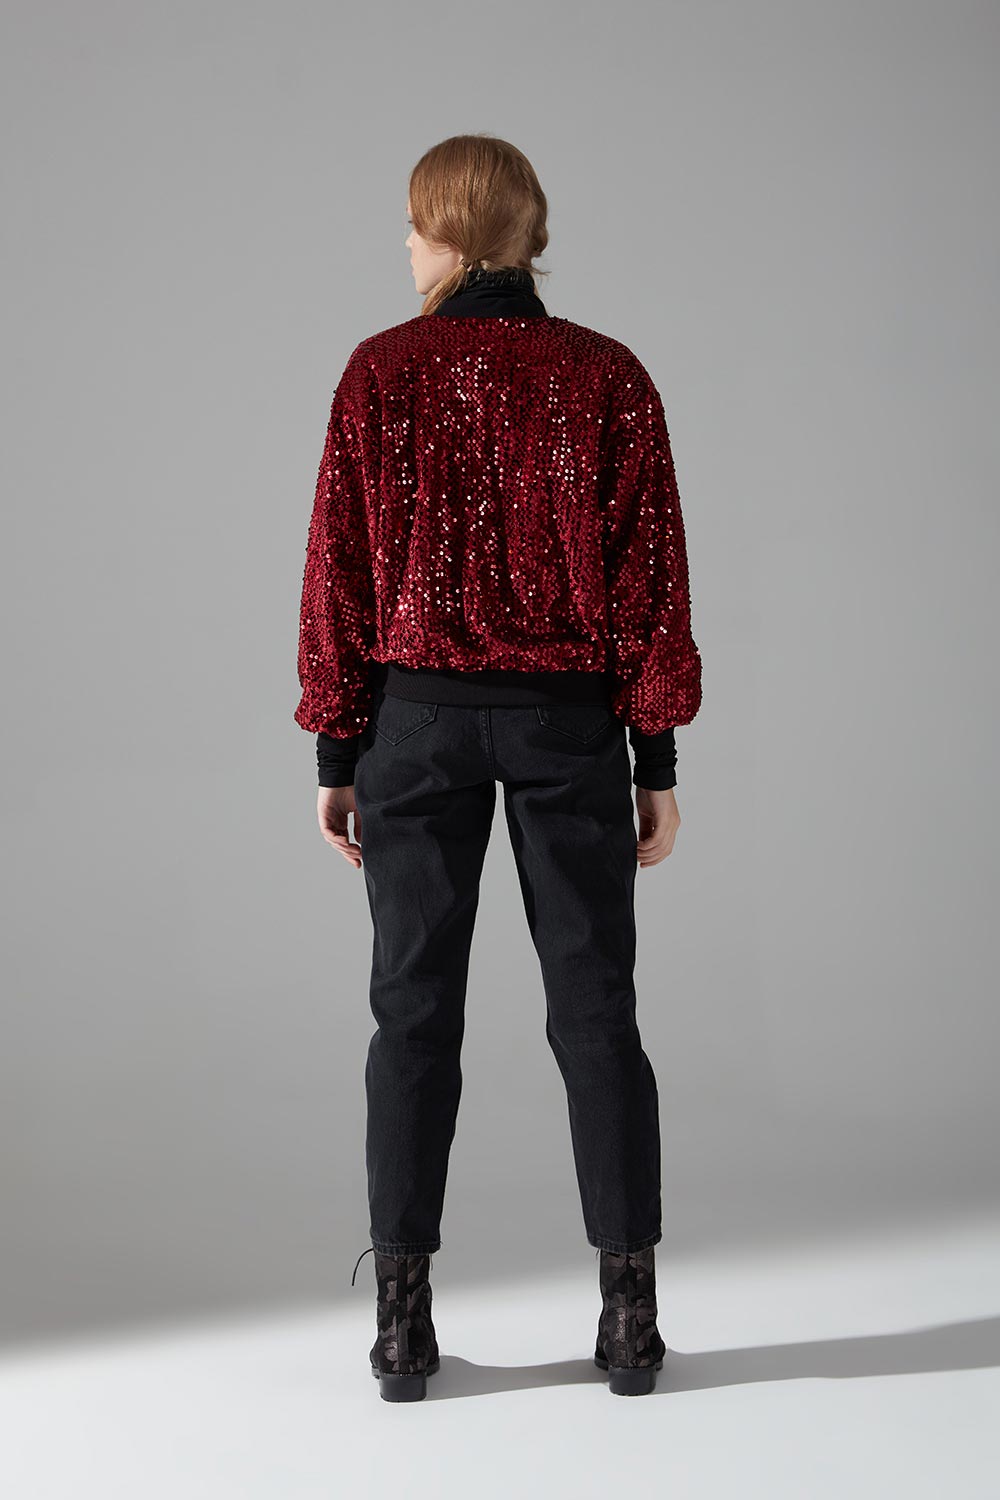 Sequined Bomber (Claret Red) 